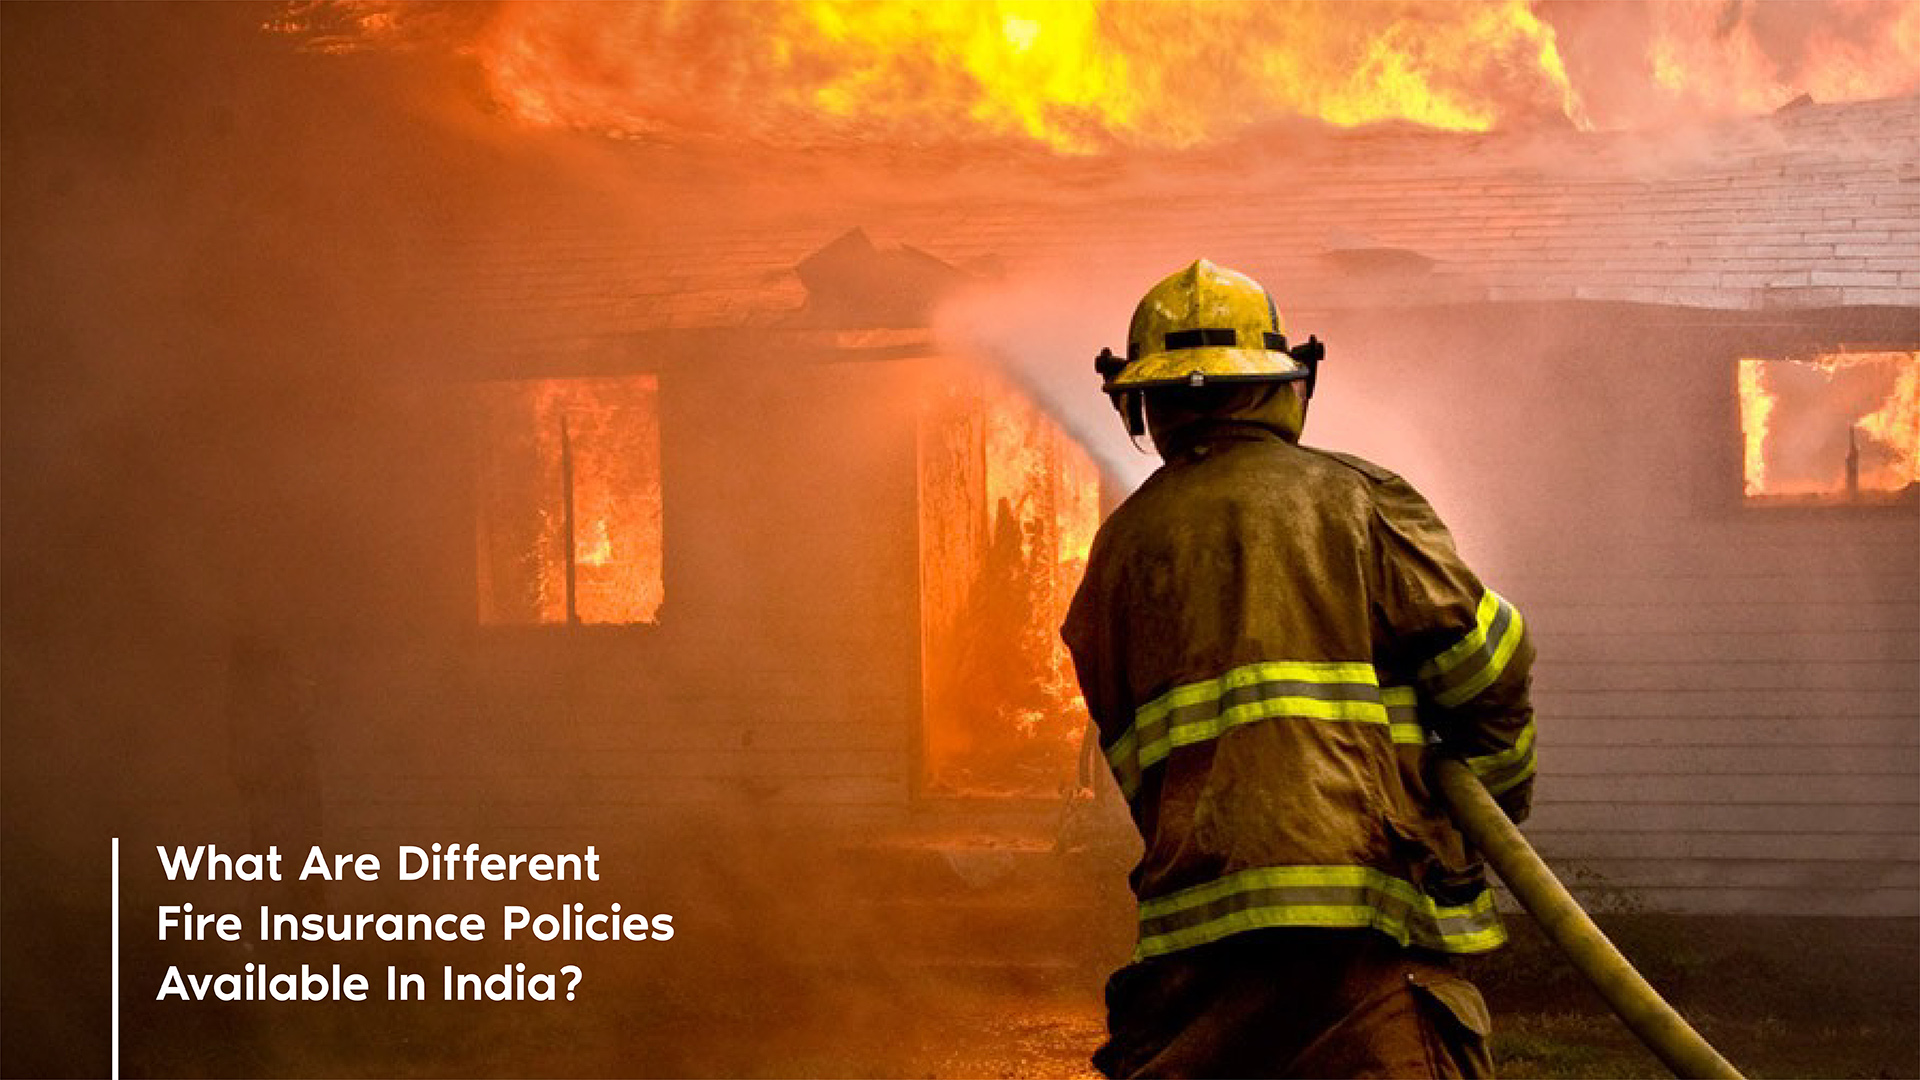 What are Different Fire Insurance Policies Available in India?